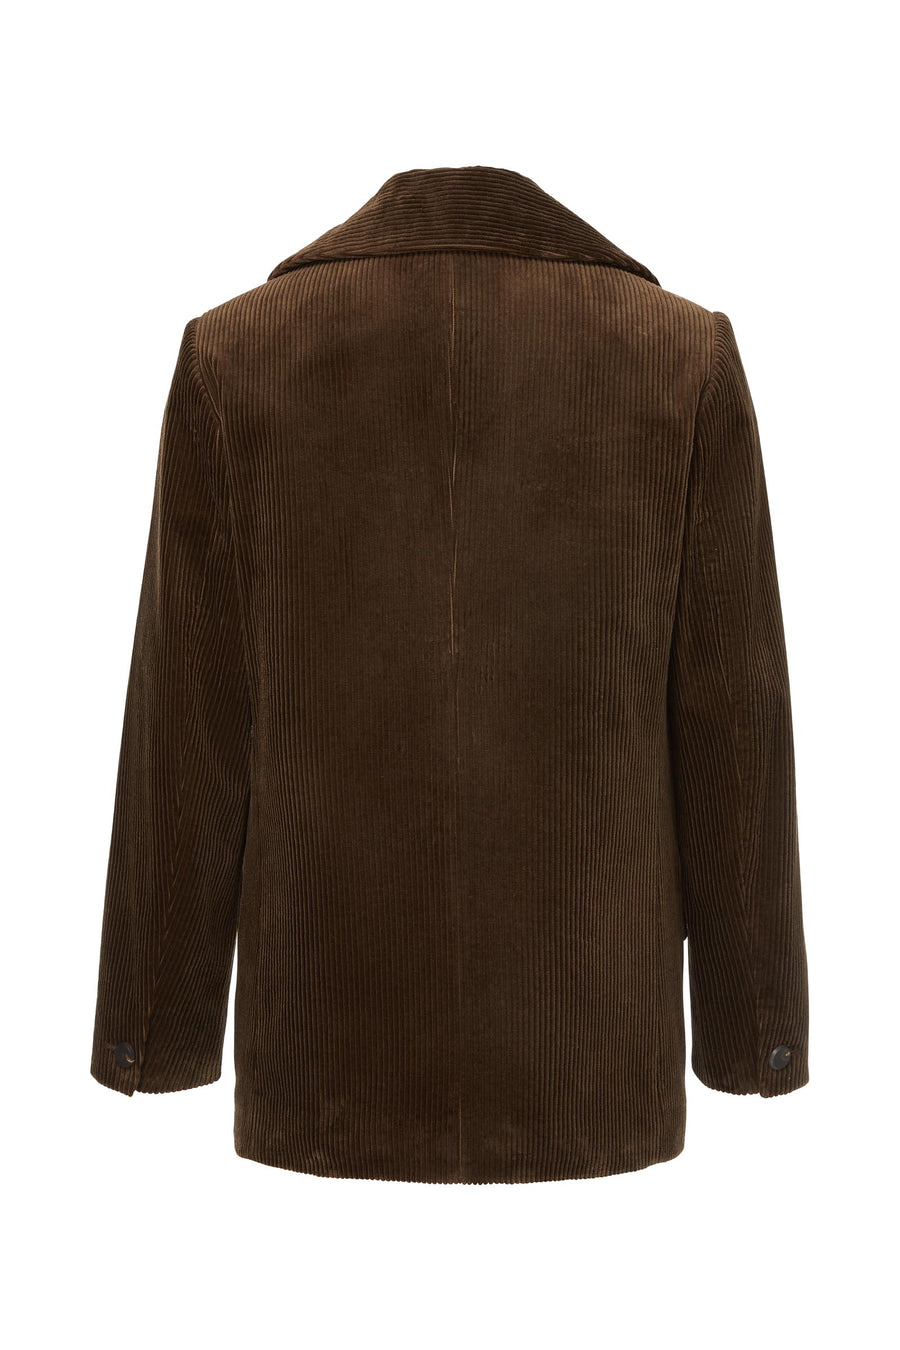 Men's corduroy jacket brown with black and white lining made of wool and cotton. Back